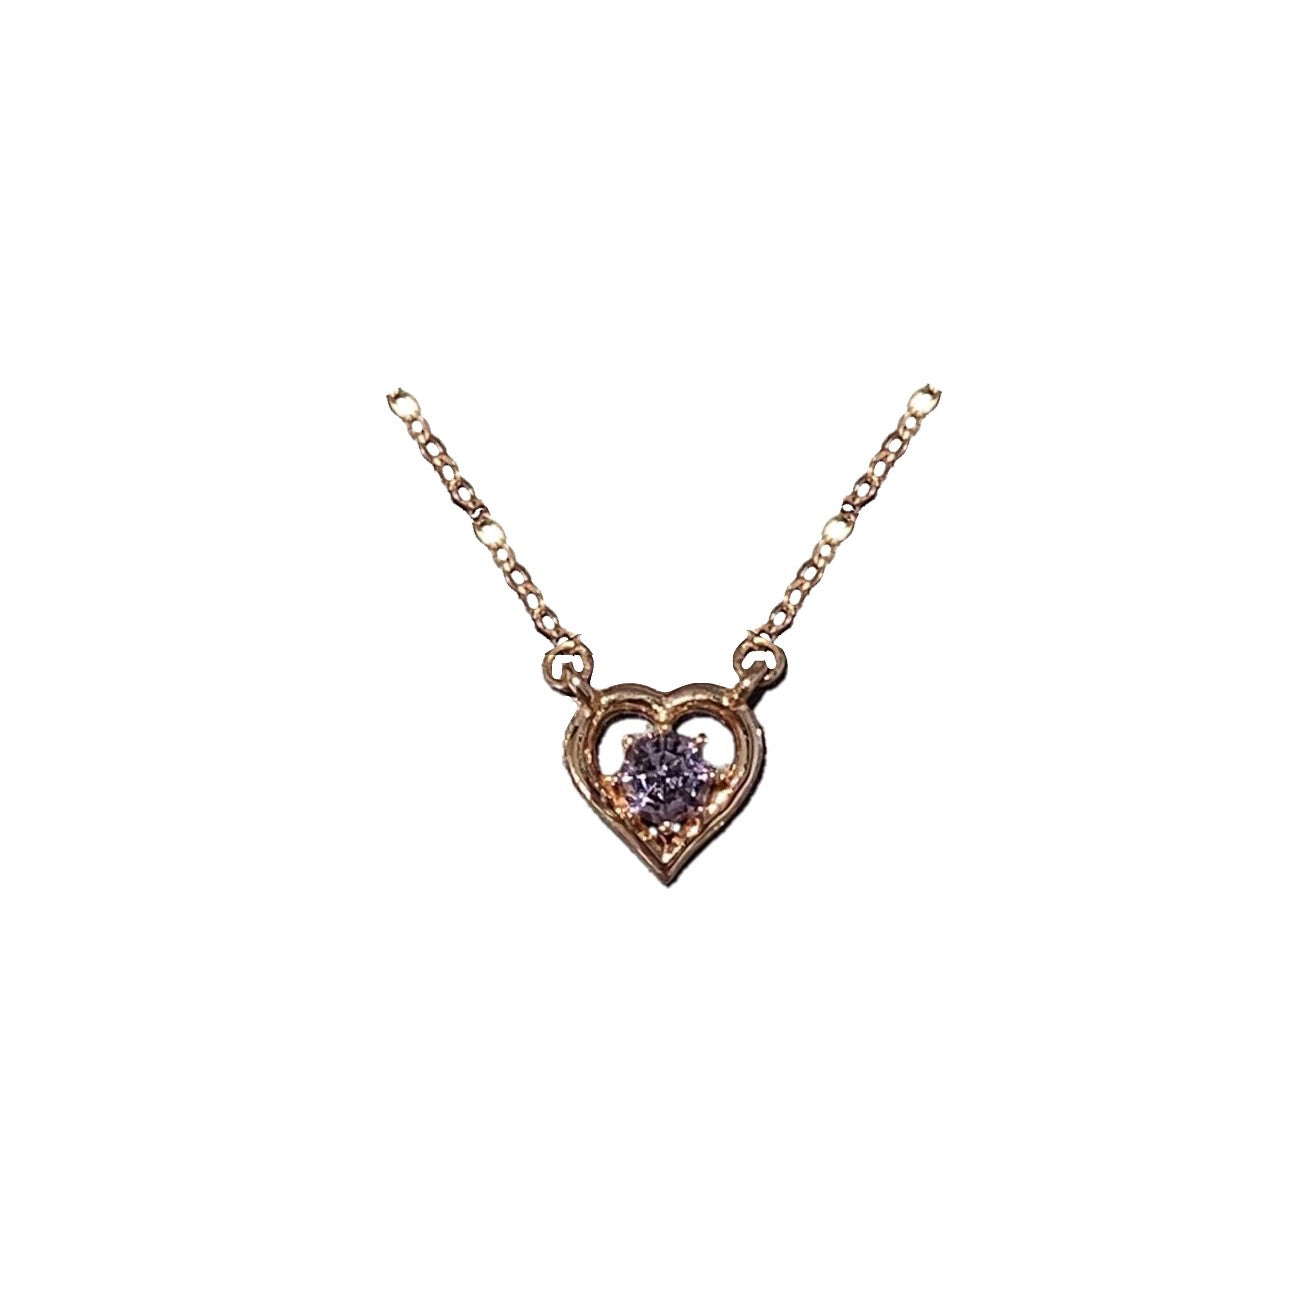 FARA Natural Gemstone Heart Necklace in 18K Rose / Gold / Rhodium Plated Sterling Silver for Women